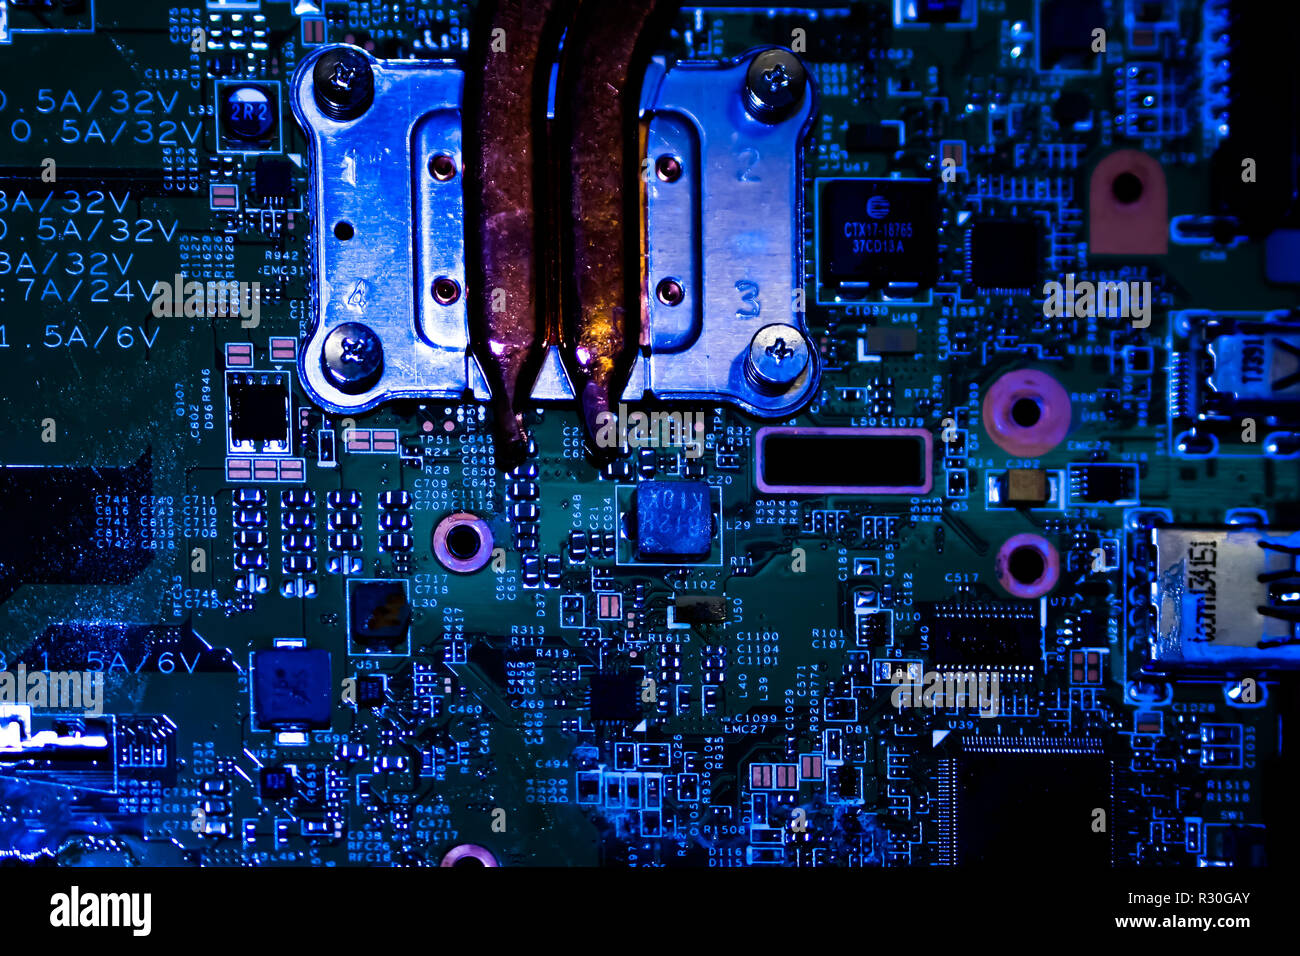 Light reflections from a dark motherboard. Stock Photo